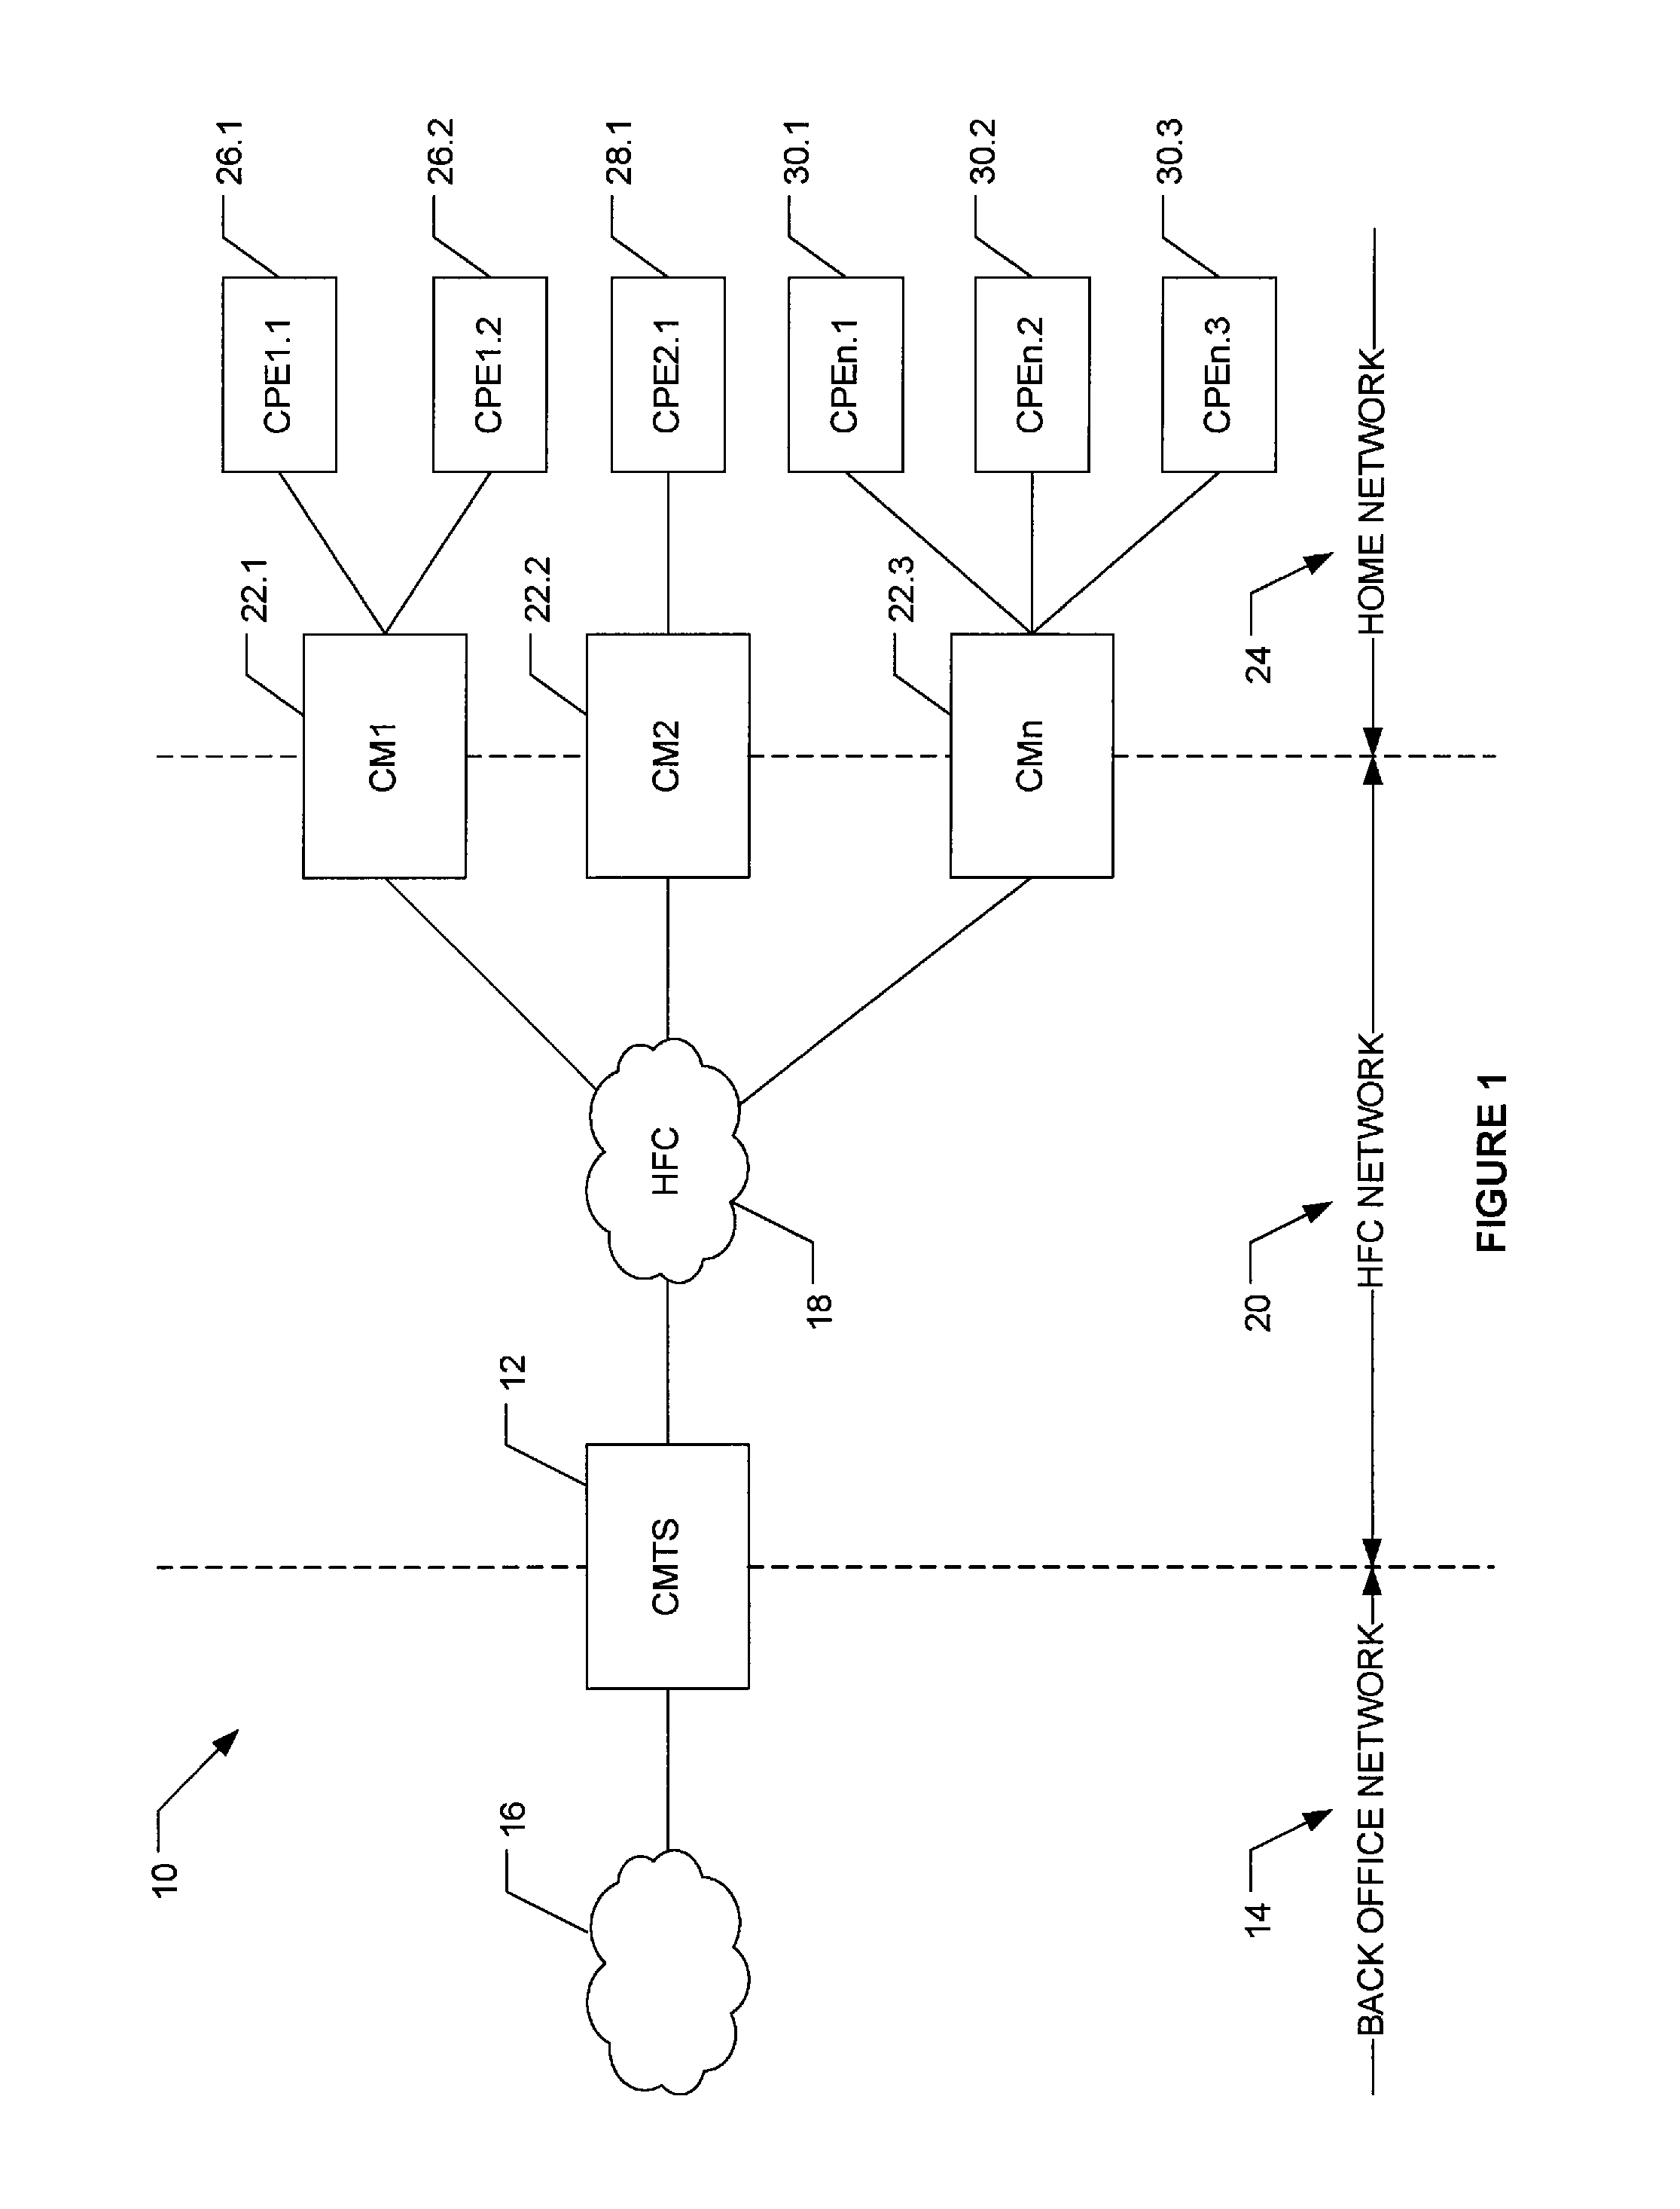 Configuration of service groups in a cable network